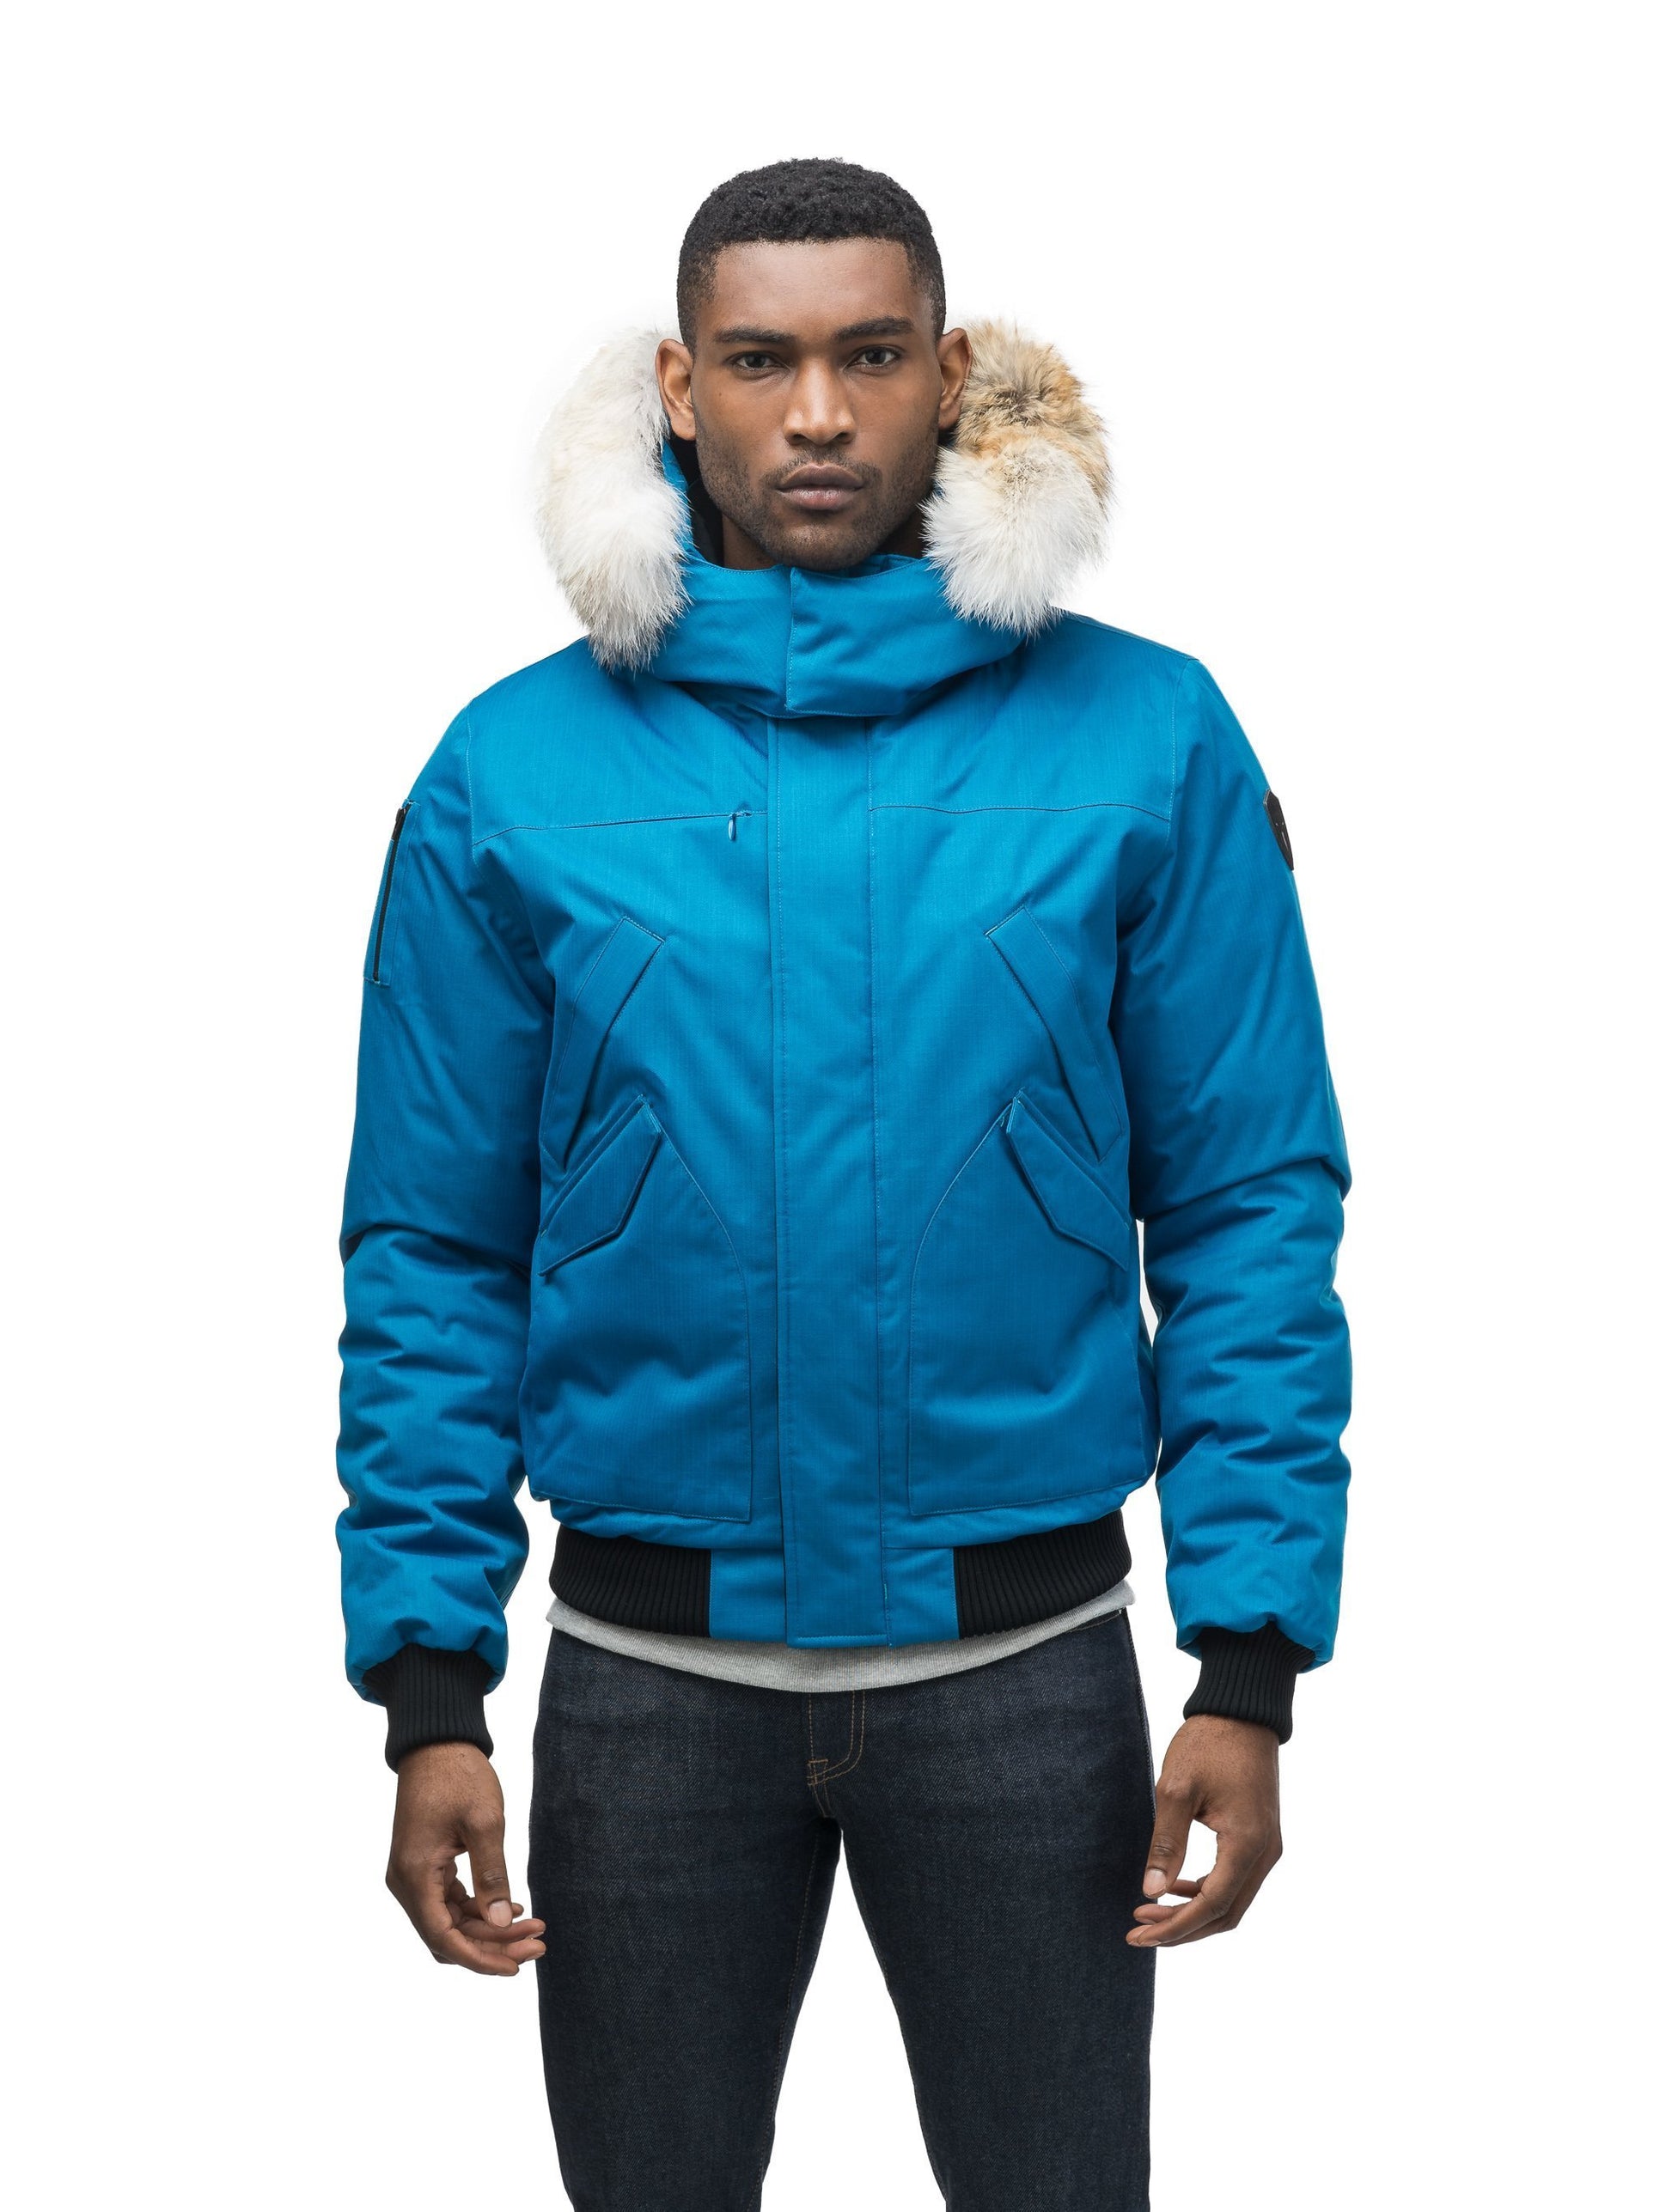 Men's classic down filled bomber jacket with a down filledÃƒÆ’Ã¢â‚¬Å¡Ãƒâ€šÃ‚Â hood that features a removable coyote fur trim and concealed moldable framing wire in Sea Blue